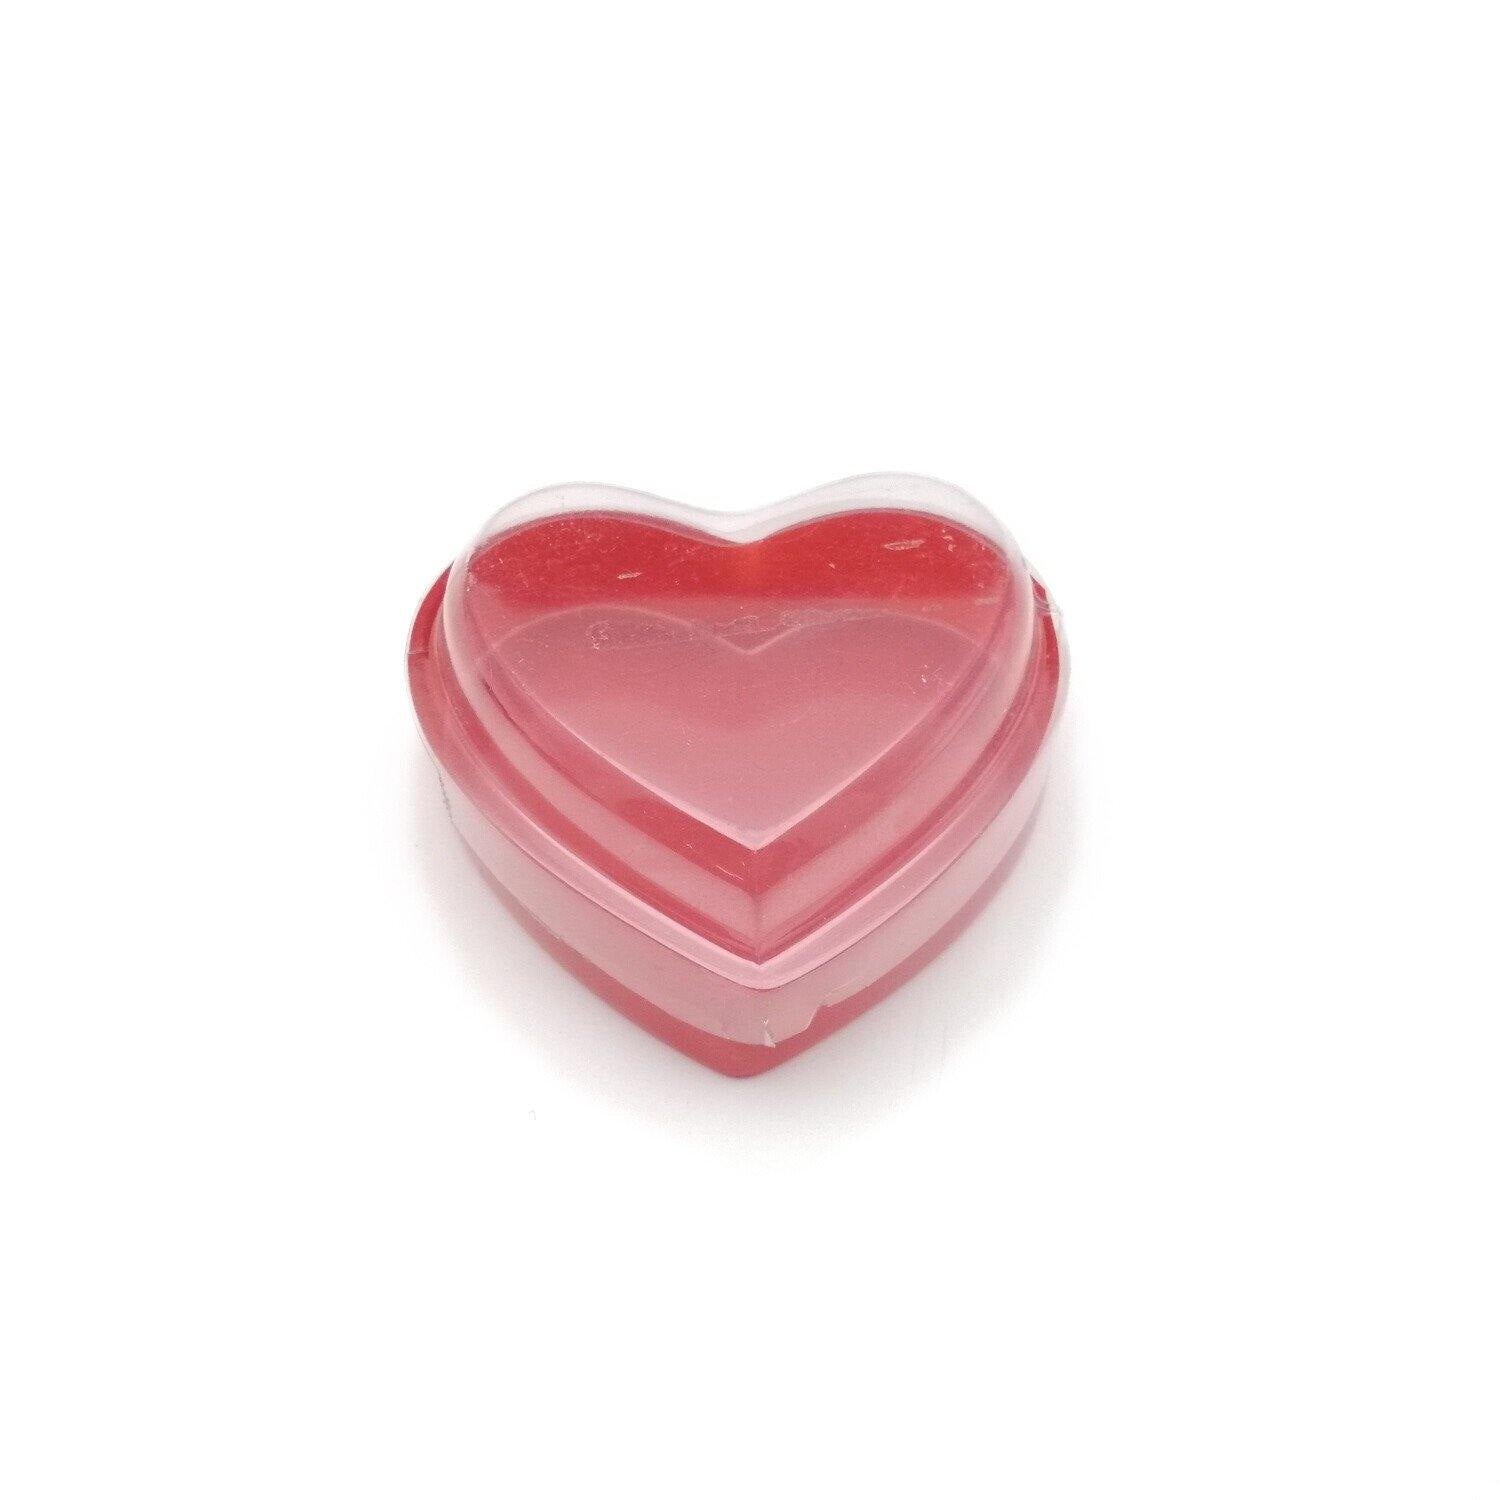 TINY TAMBOK HEART RED BASE (SP) - Kitchen Convenience: Ingredients & Supplies Delivery